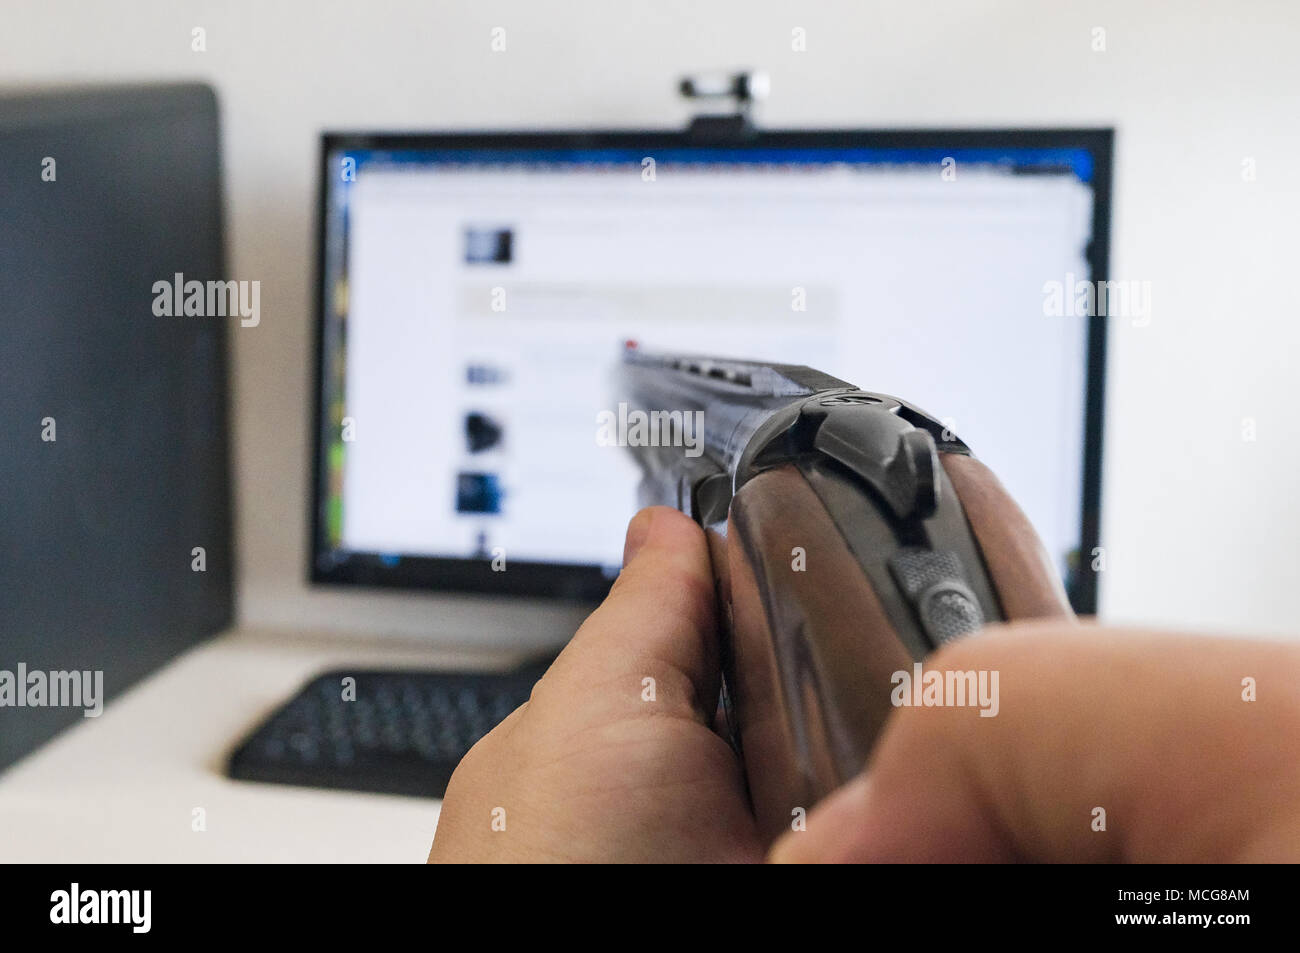 Hatred of the computer and modern technologies and aming a hunting or sporting classic smoothbore gun Stock Photo